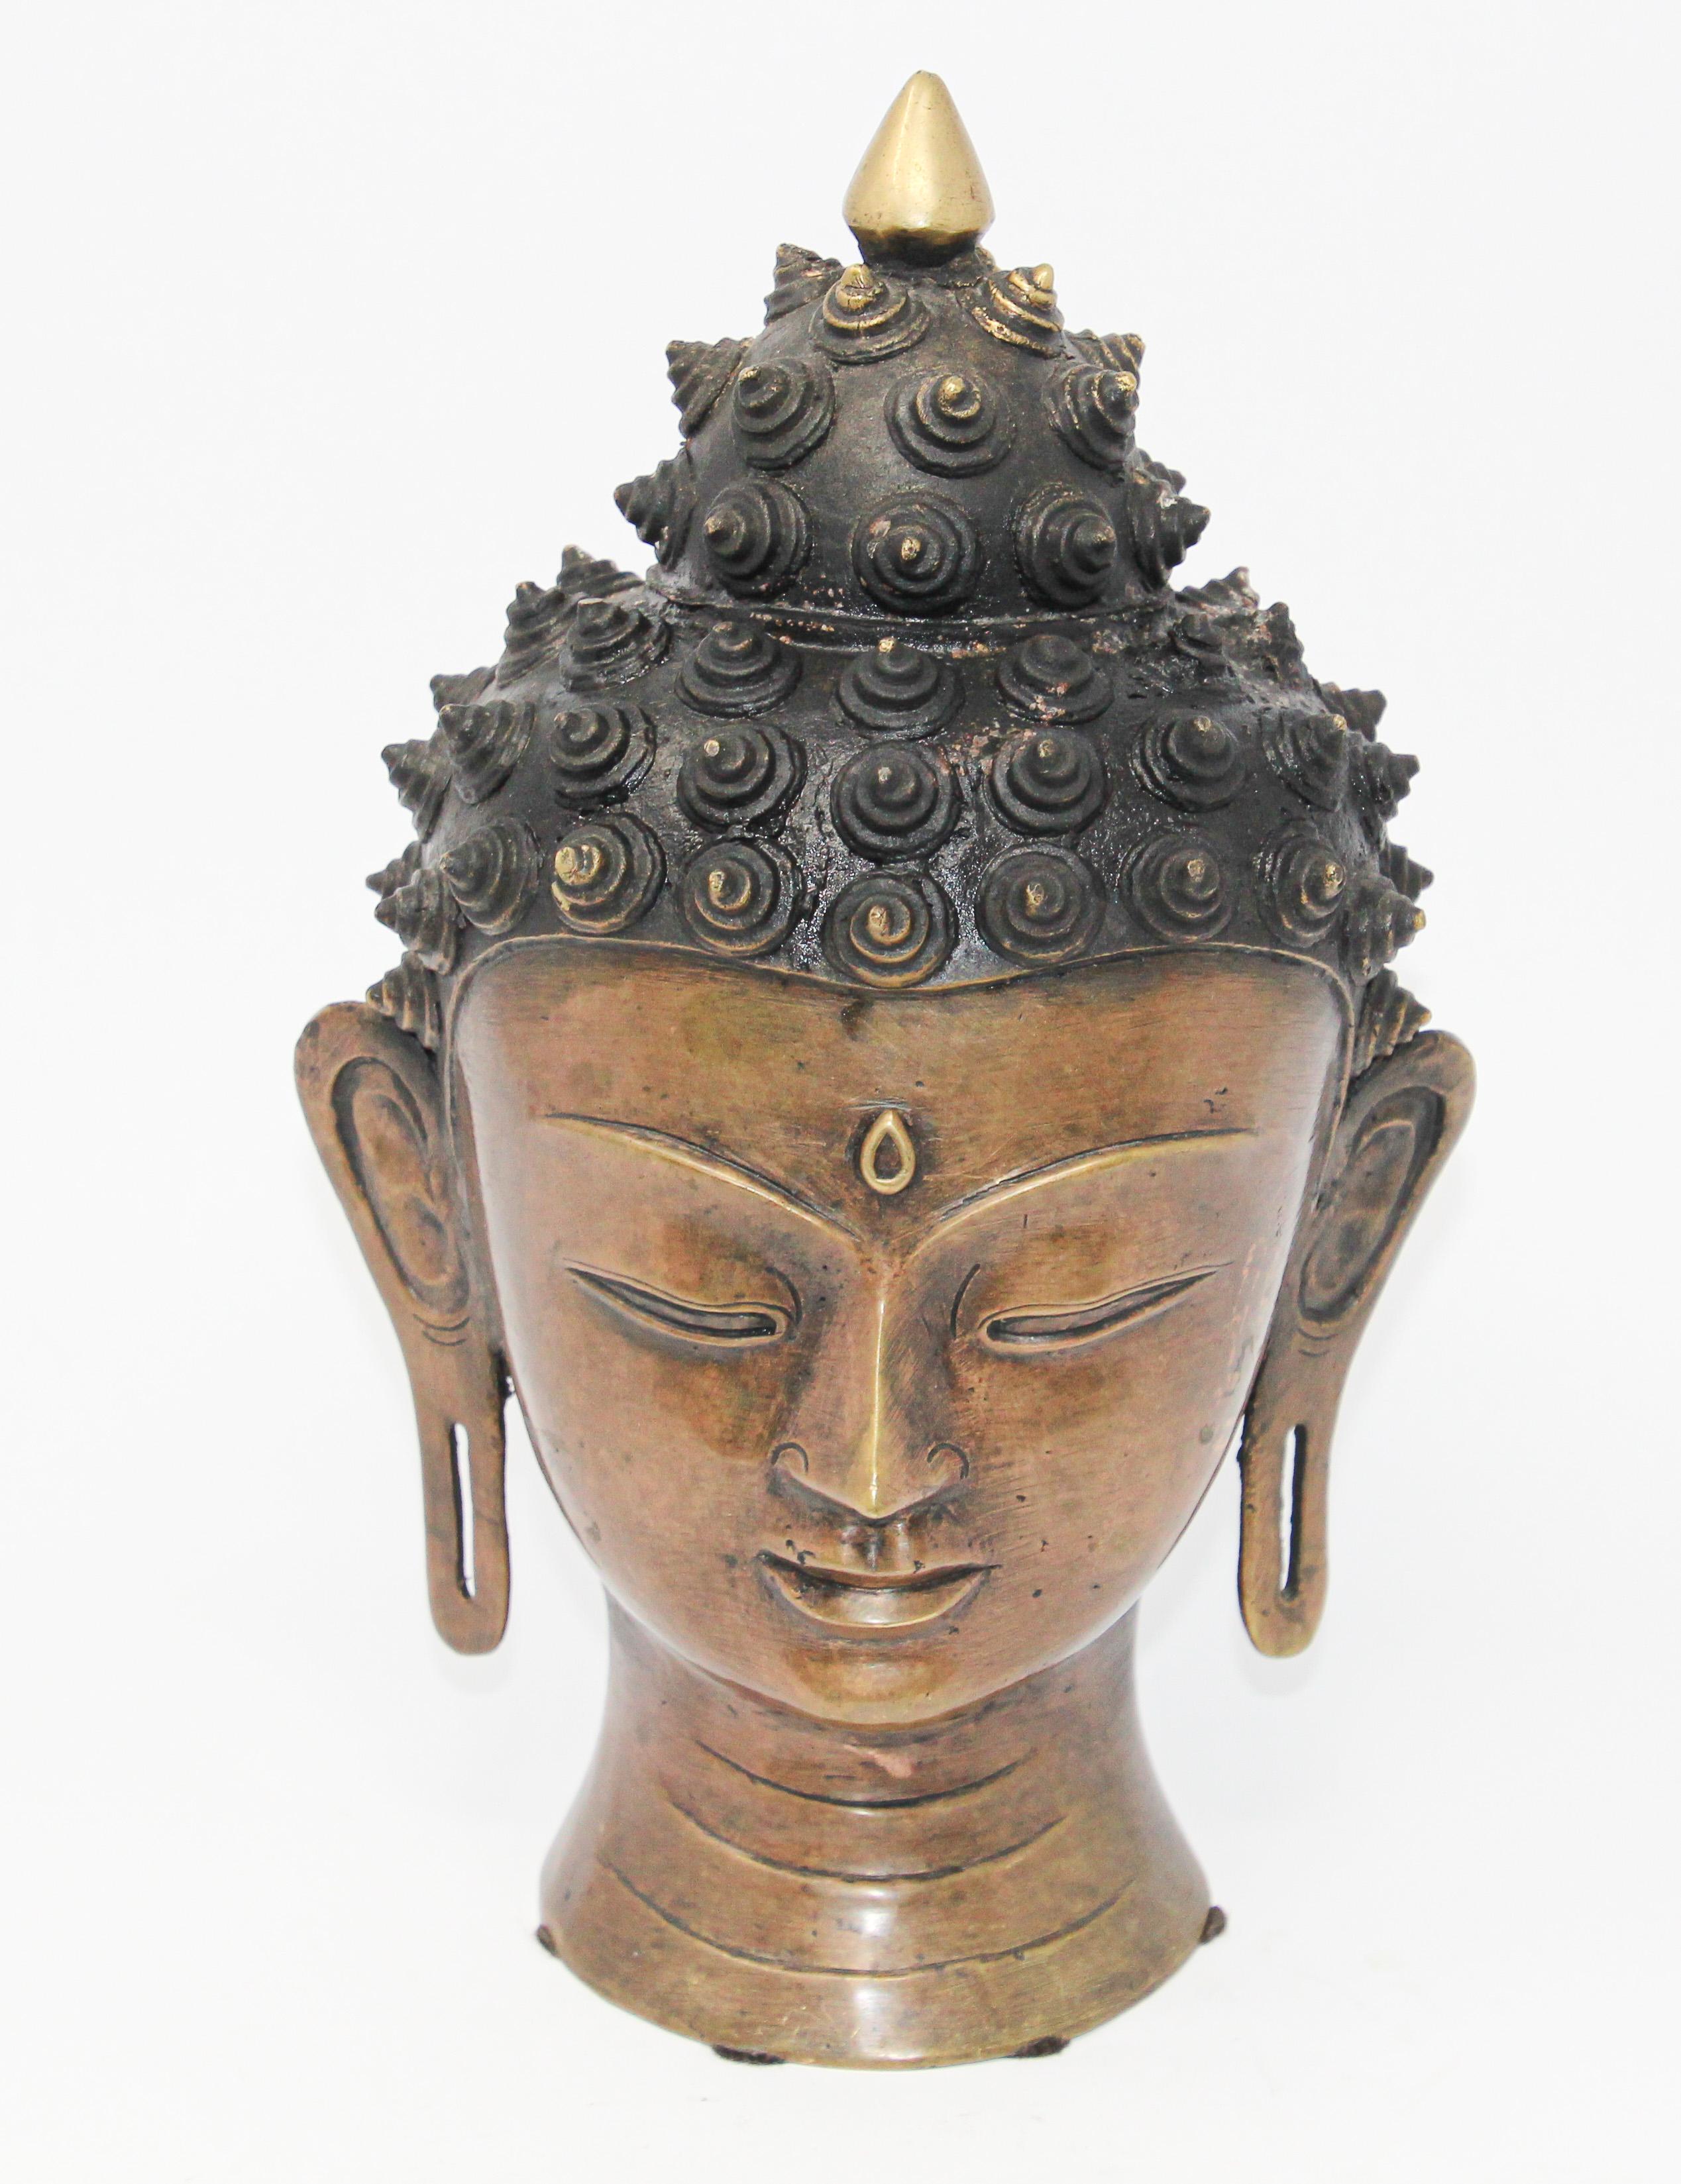 Cast bronze Buddha head.
Buddha head with eyes lowered in meditation, serene and calm, representing the enlightened Buddha.
Finely modeled with incised chin, elongated eyes and gently arching brows, flanked by pendulous earlobes, the hair in tight